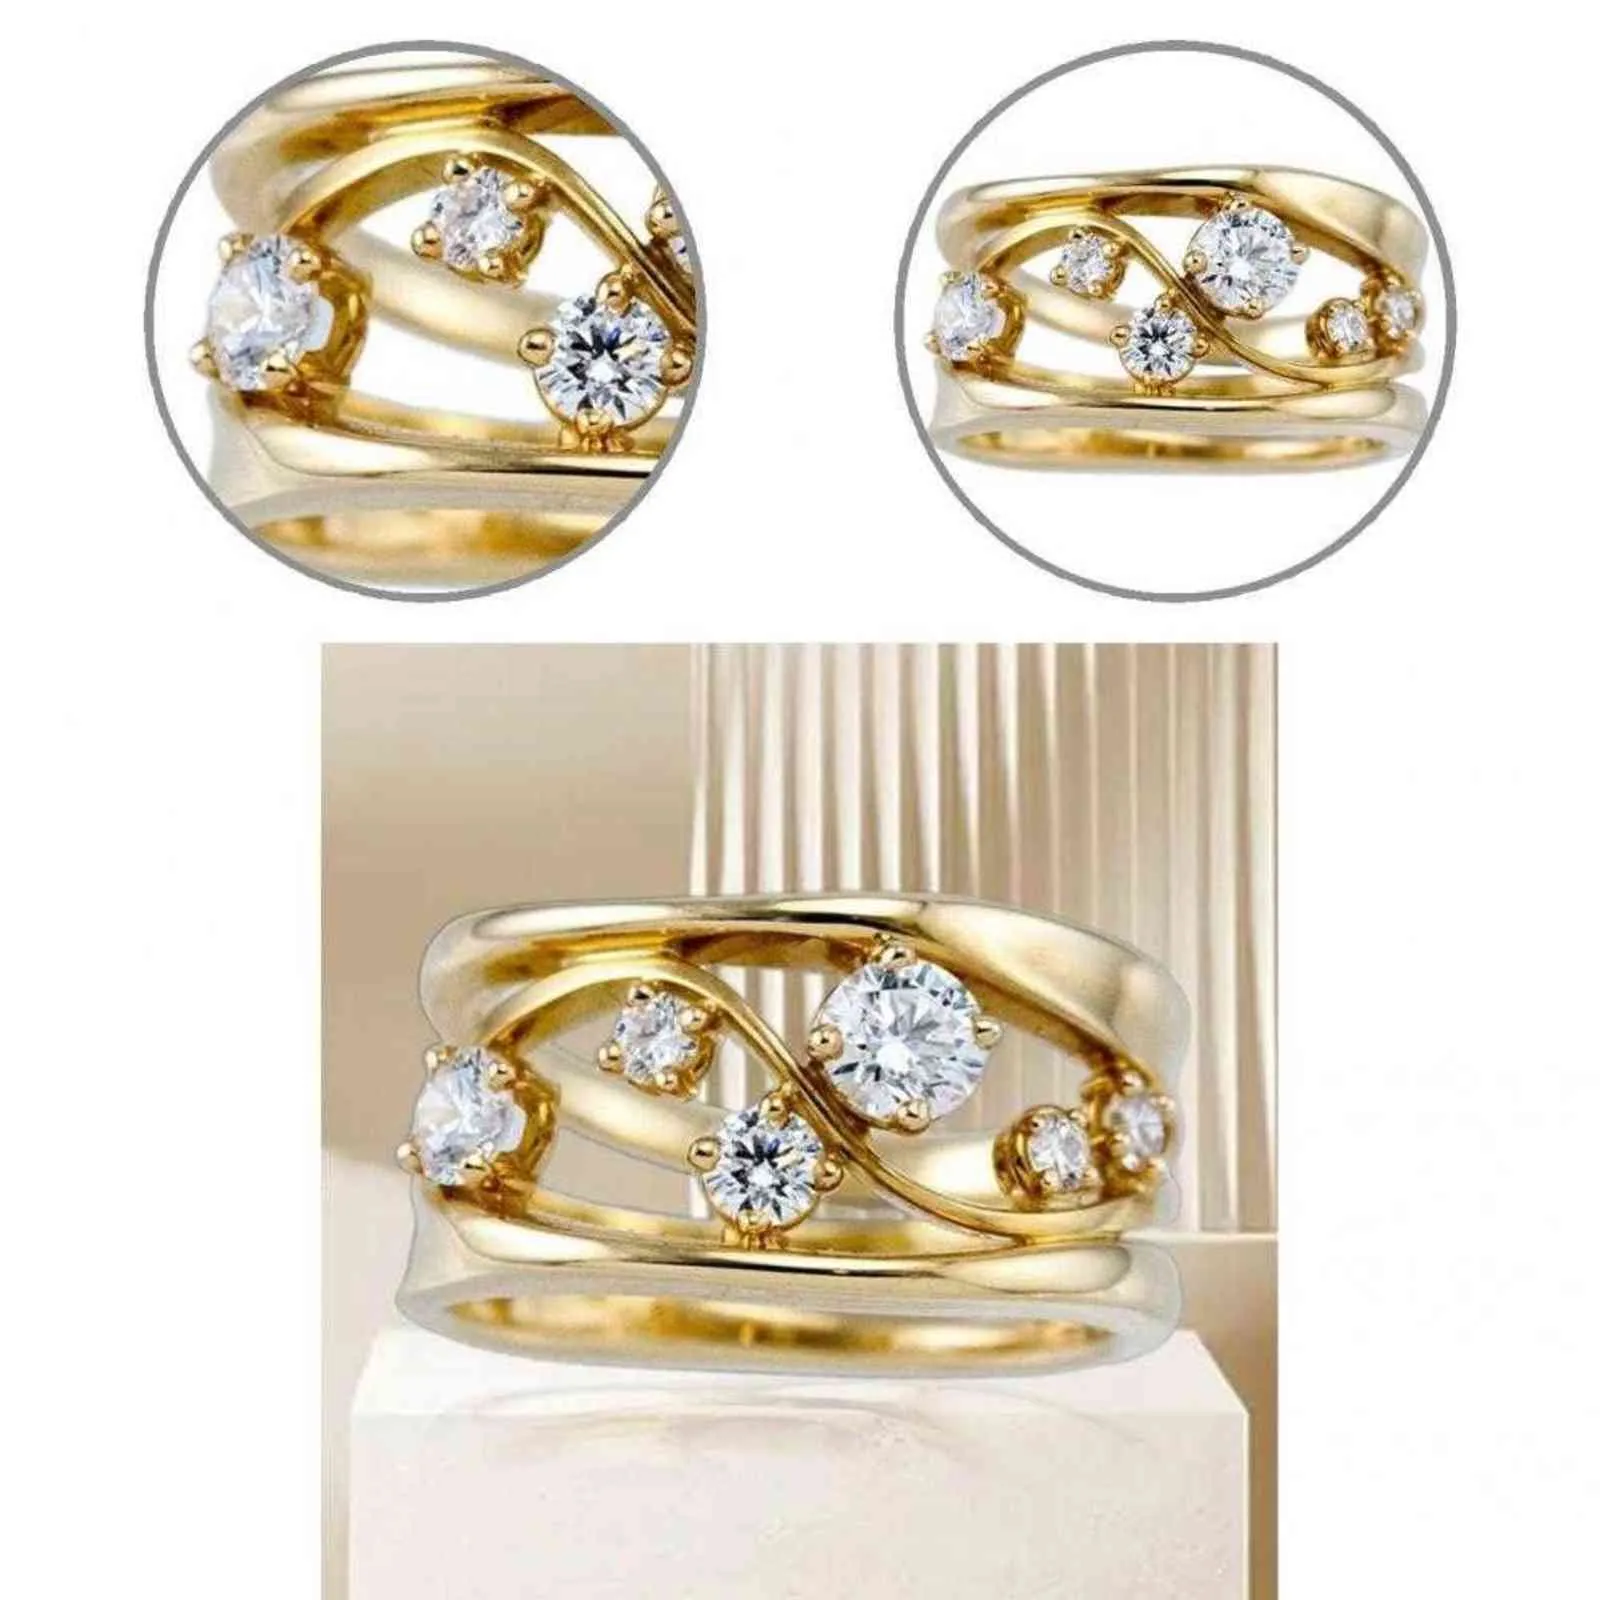 Female Ring Anti-wear Hard to Fade Eye-catching Exquisite Wave Shape Girls Ring Women Ring for Banquet G1125